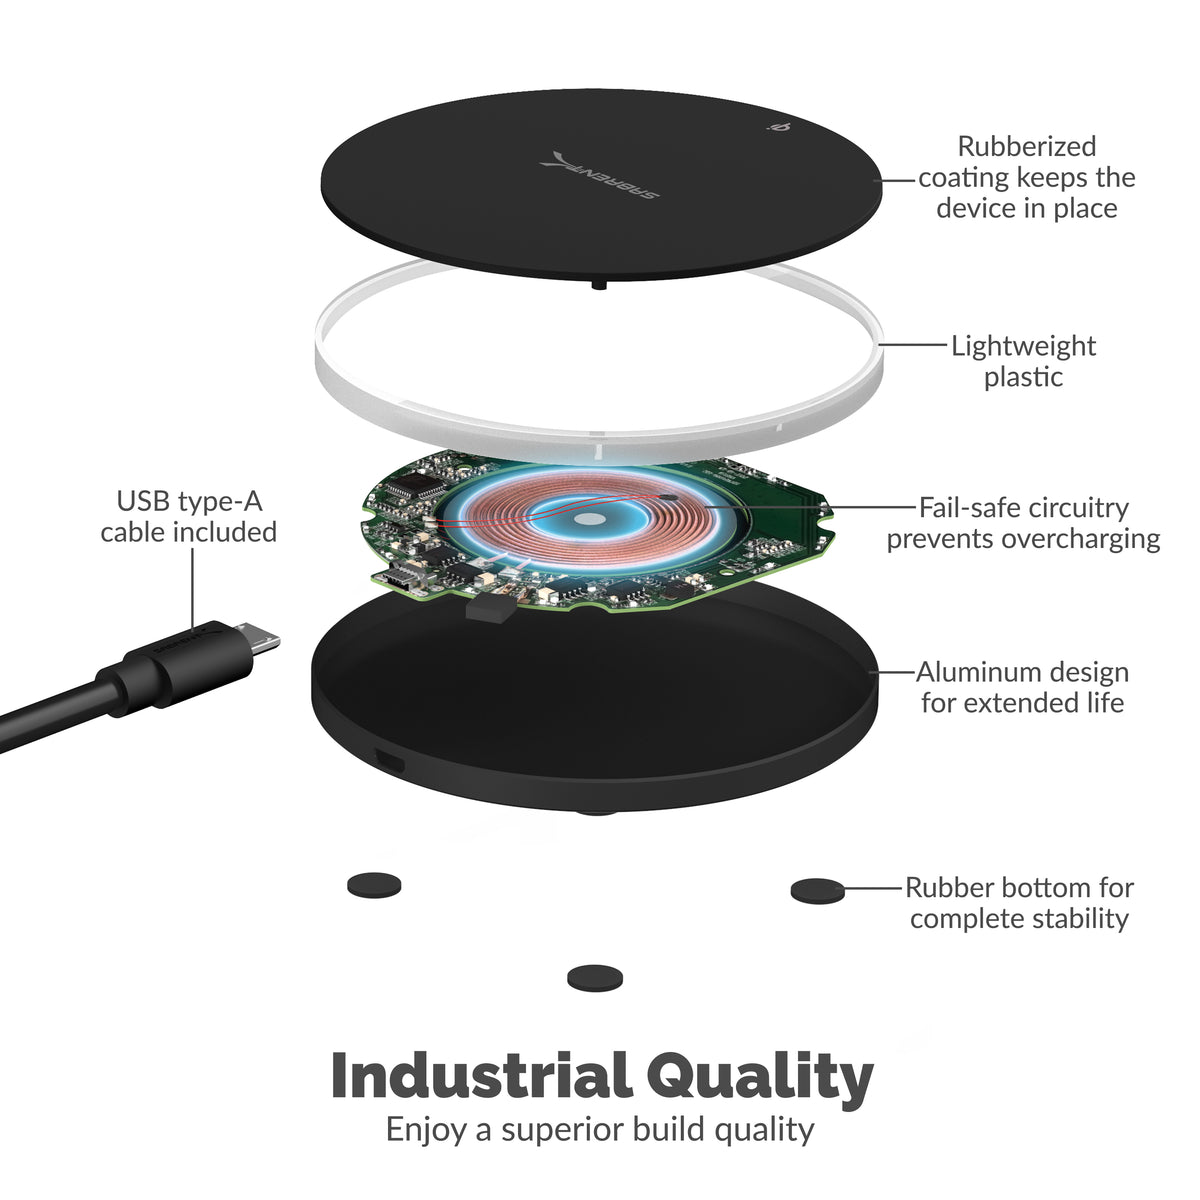 10W qi Wireless Fast Charger Charging Pad